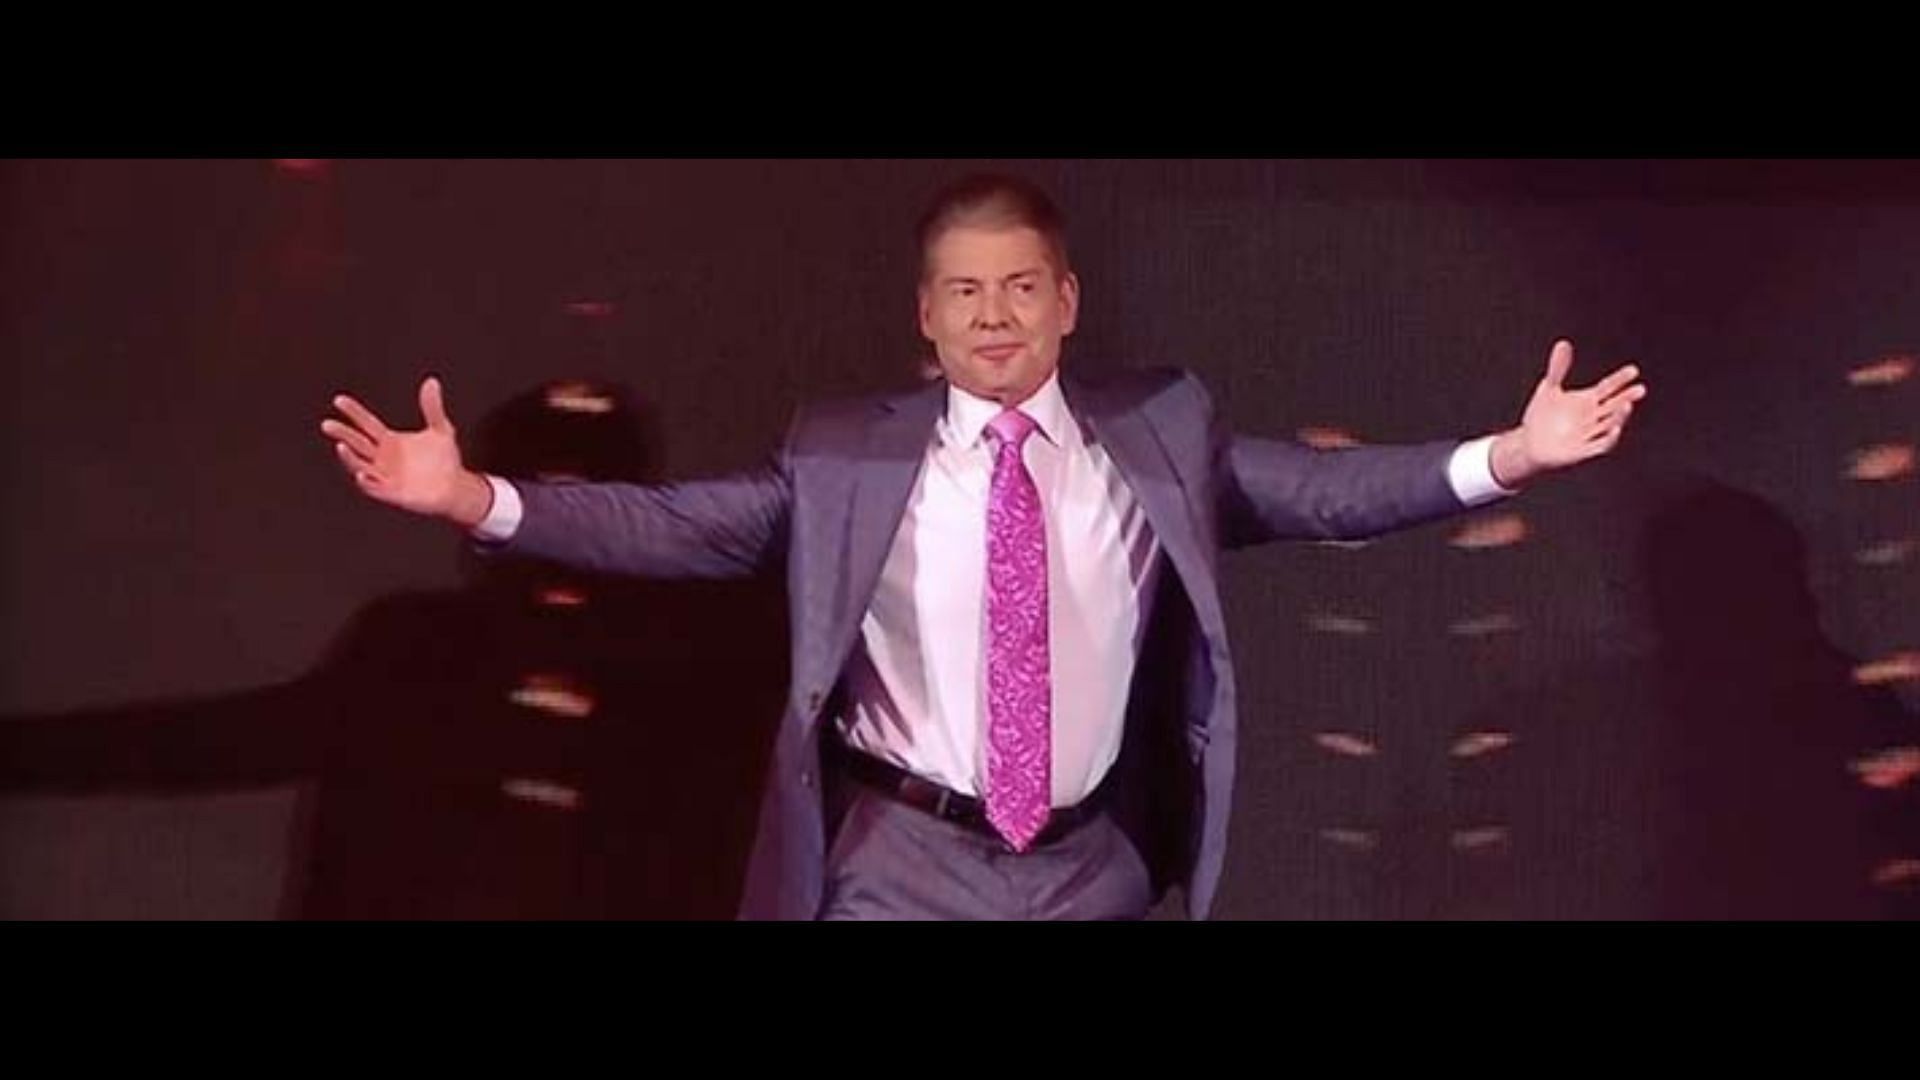 Vince McMahon returned to WWE in January 2023 as Executive Chairman